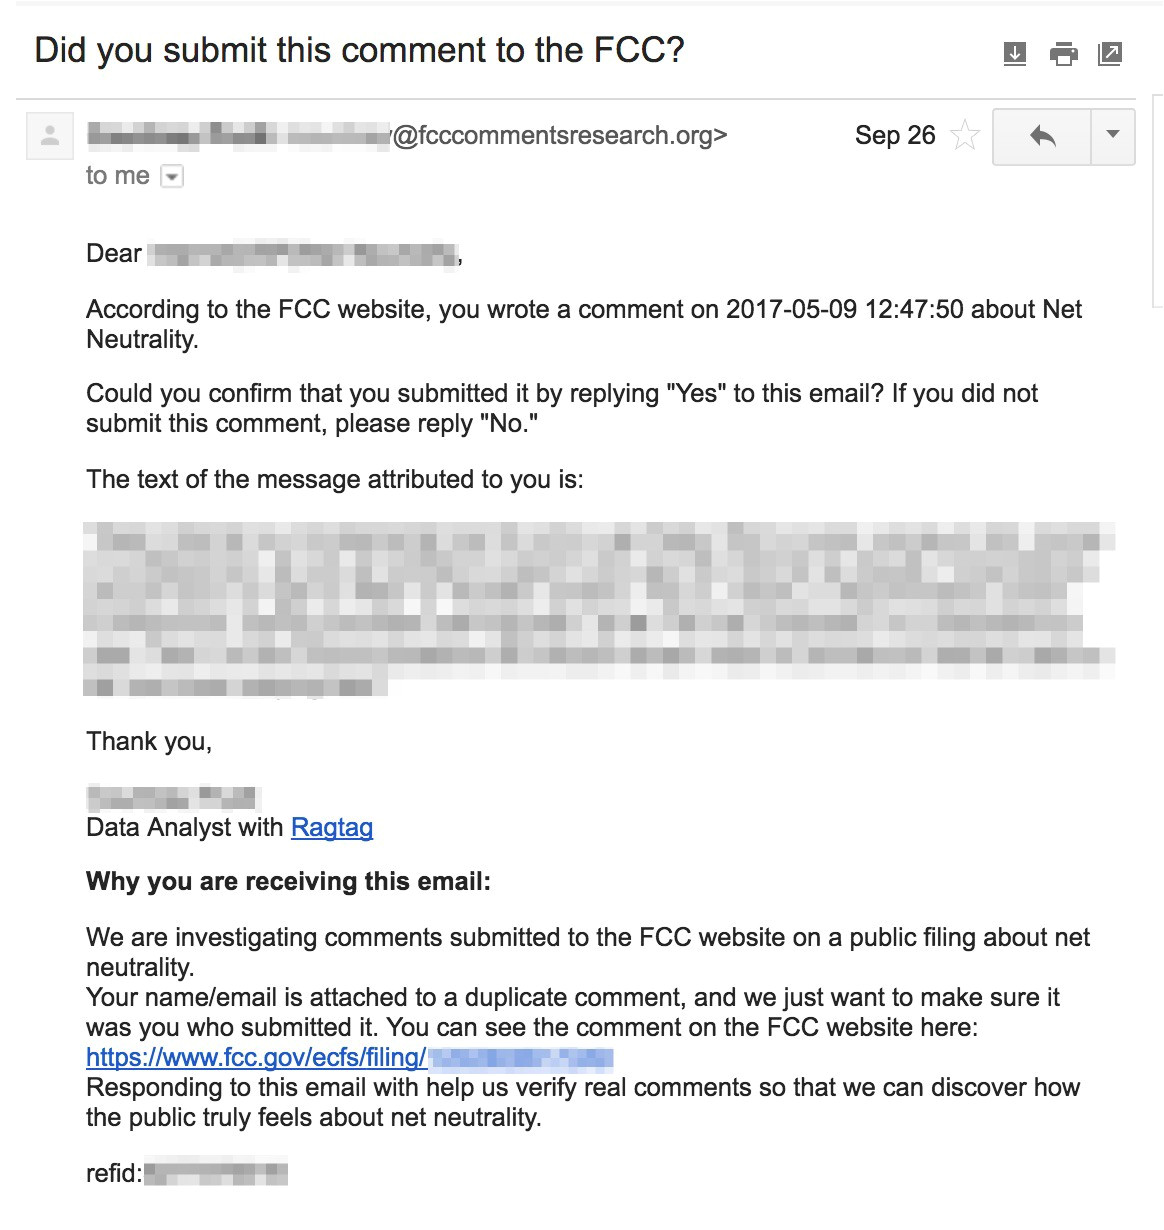 bot or not verifying public comments on net neutrality 8c77ee54a02e